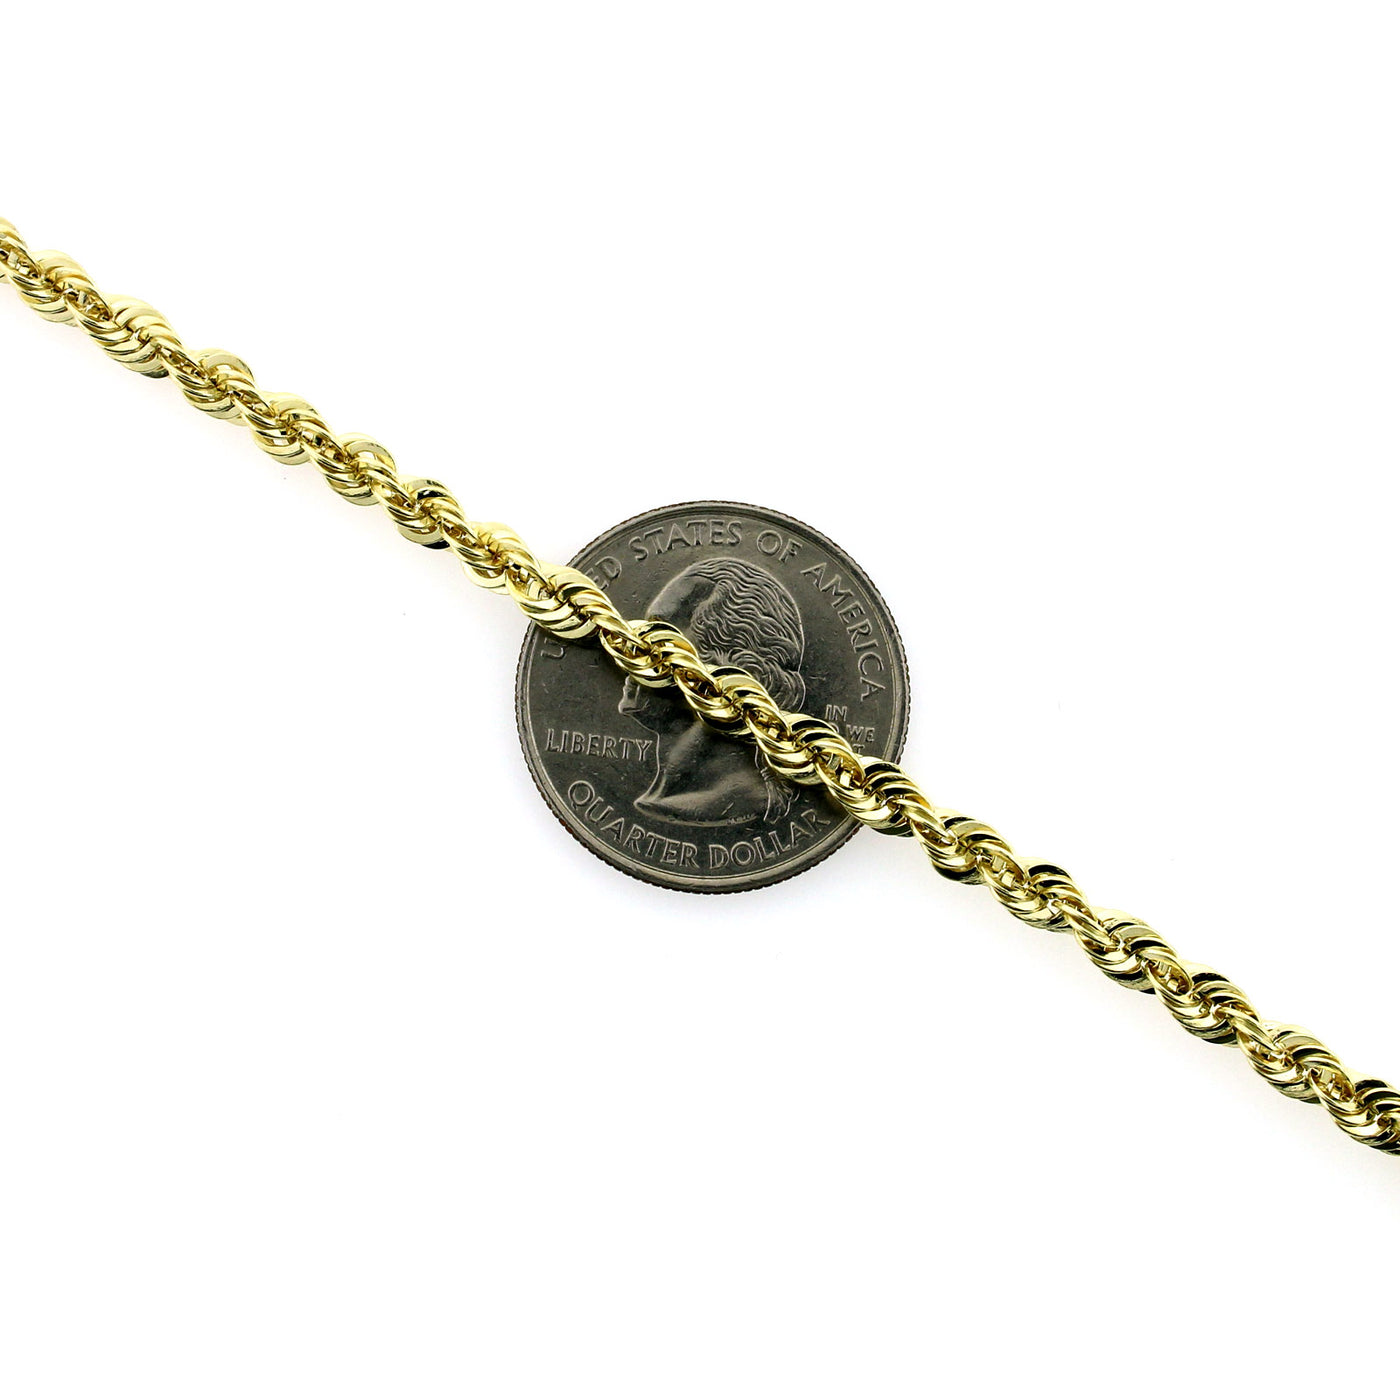 10K Yellow Gold Rope Chain Necklace 4MM 18" 20" 22" 24" 26" 28" 30"